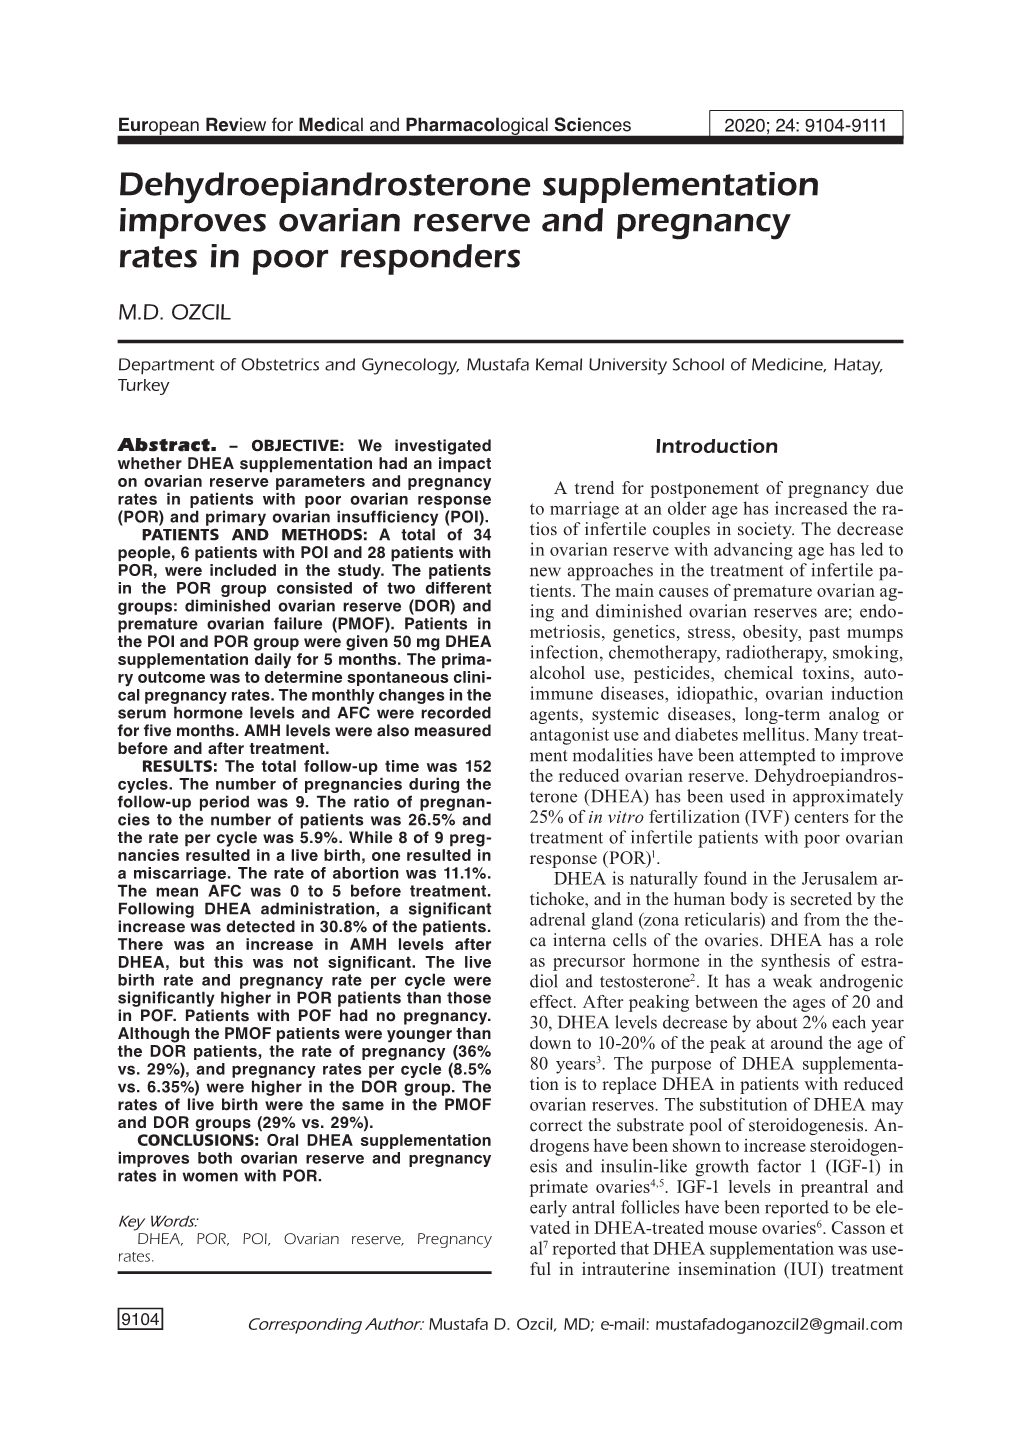 Dehydroepiandrosterone Supplementation Improves Ovarian Reserve and Pregnancy Rates in Poor Responders